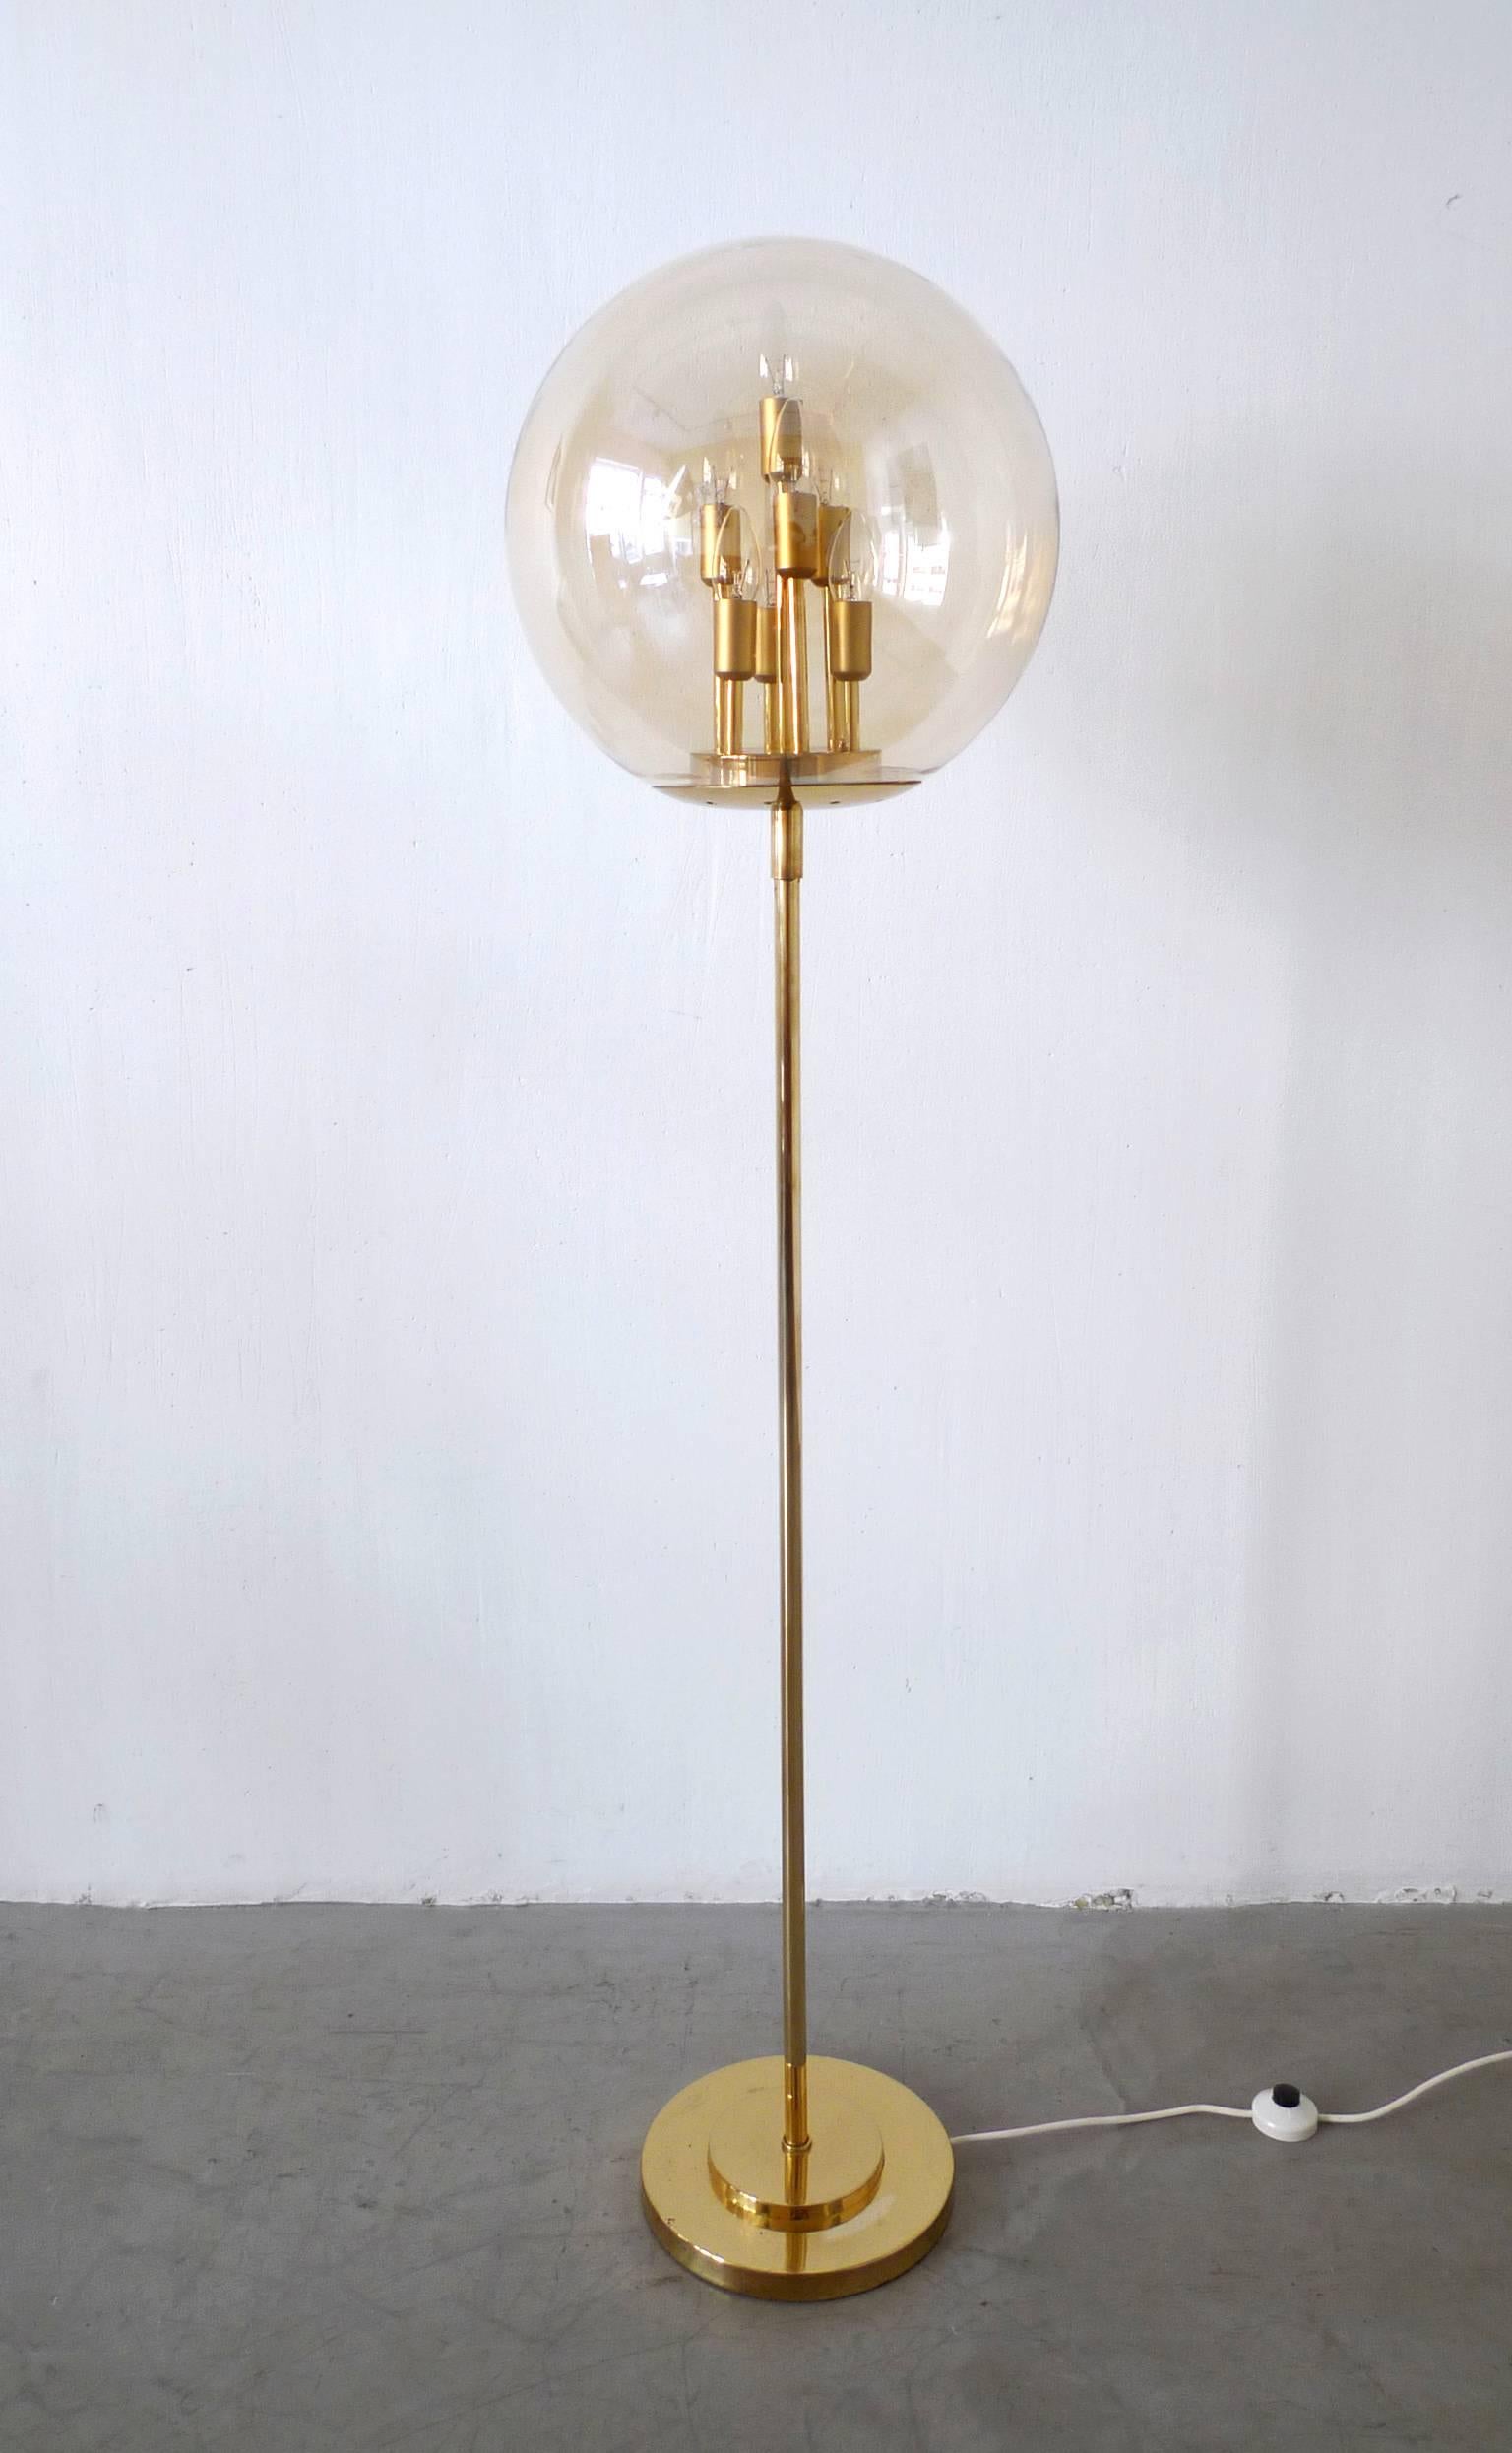 This brass floor lamp with a large tinted glass diffuser holds seven different high lamp holders inside to ensure an interesting and warmly-colored light. The lamp holders are for E 14 bulbs, and the piece remains in a very good original condition.